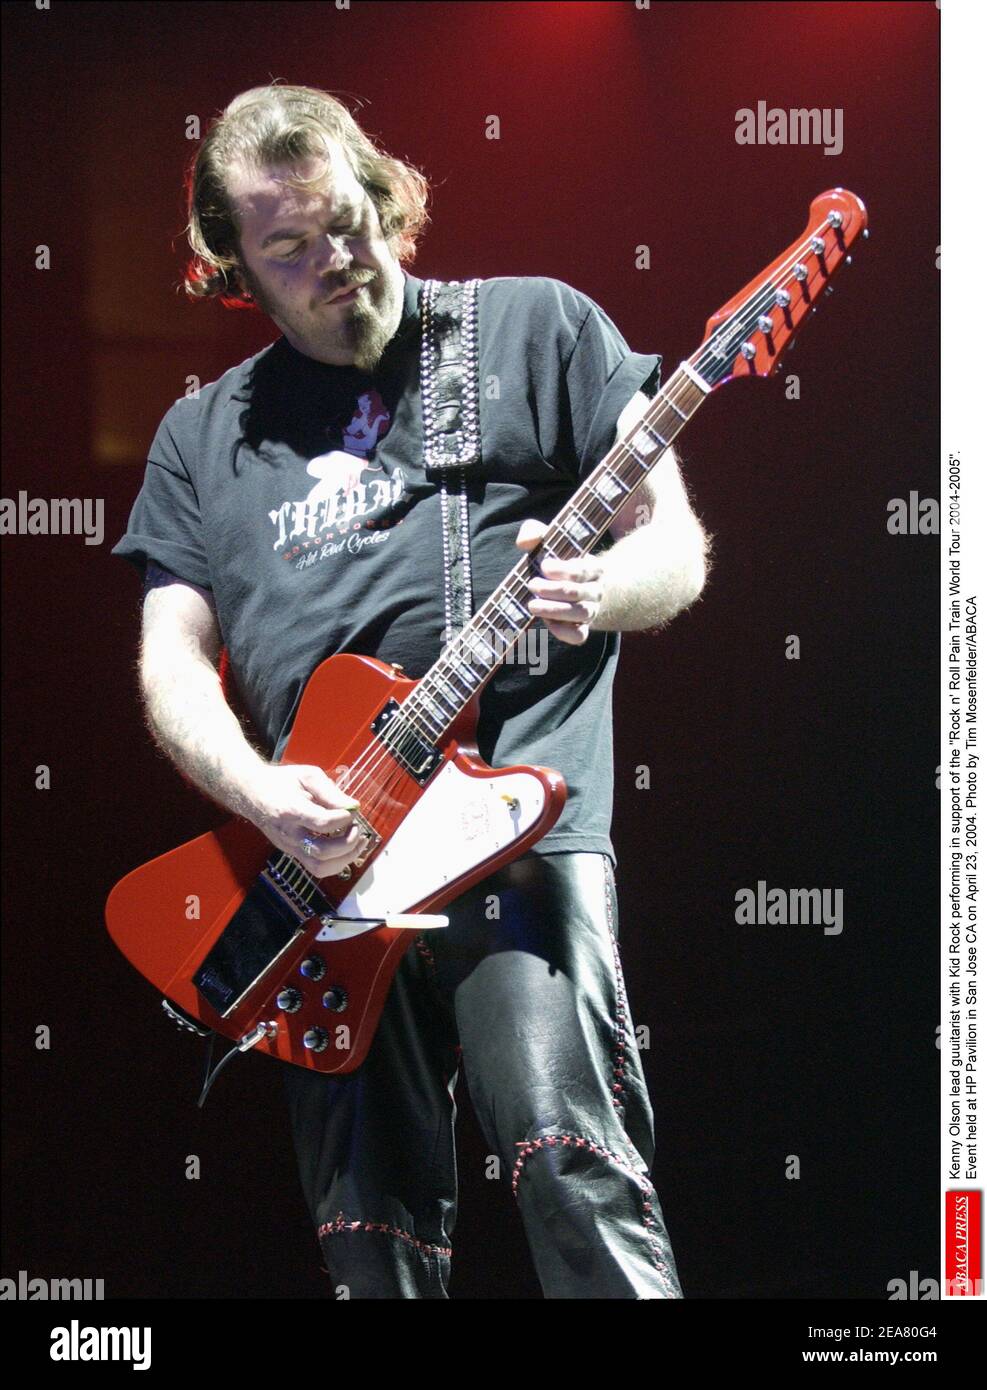 Kenny Olson lead guuitarist with Kid Rock performing in support of the Rock n' Roll Pain Train World Tour 2004-2005. Event held at HP Pavilion in San Jose CA on April 23, 2004. Photo by Tim Mosenfelder/ABACA Stock Photo